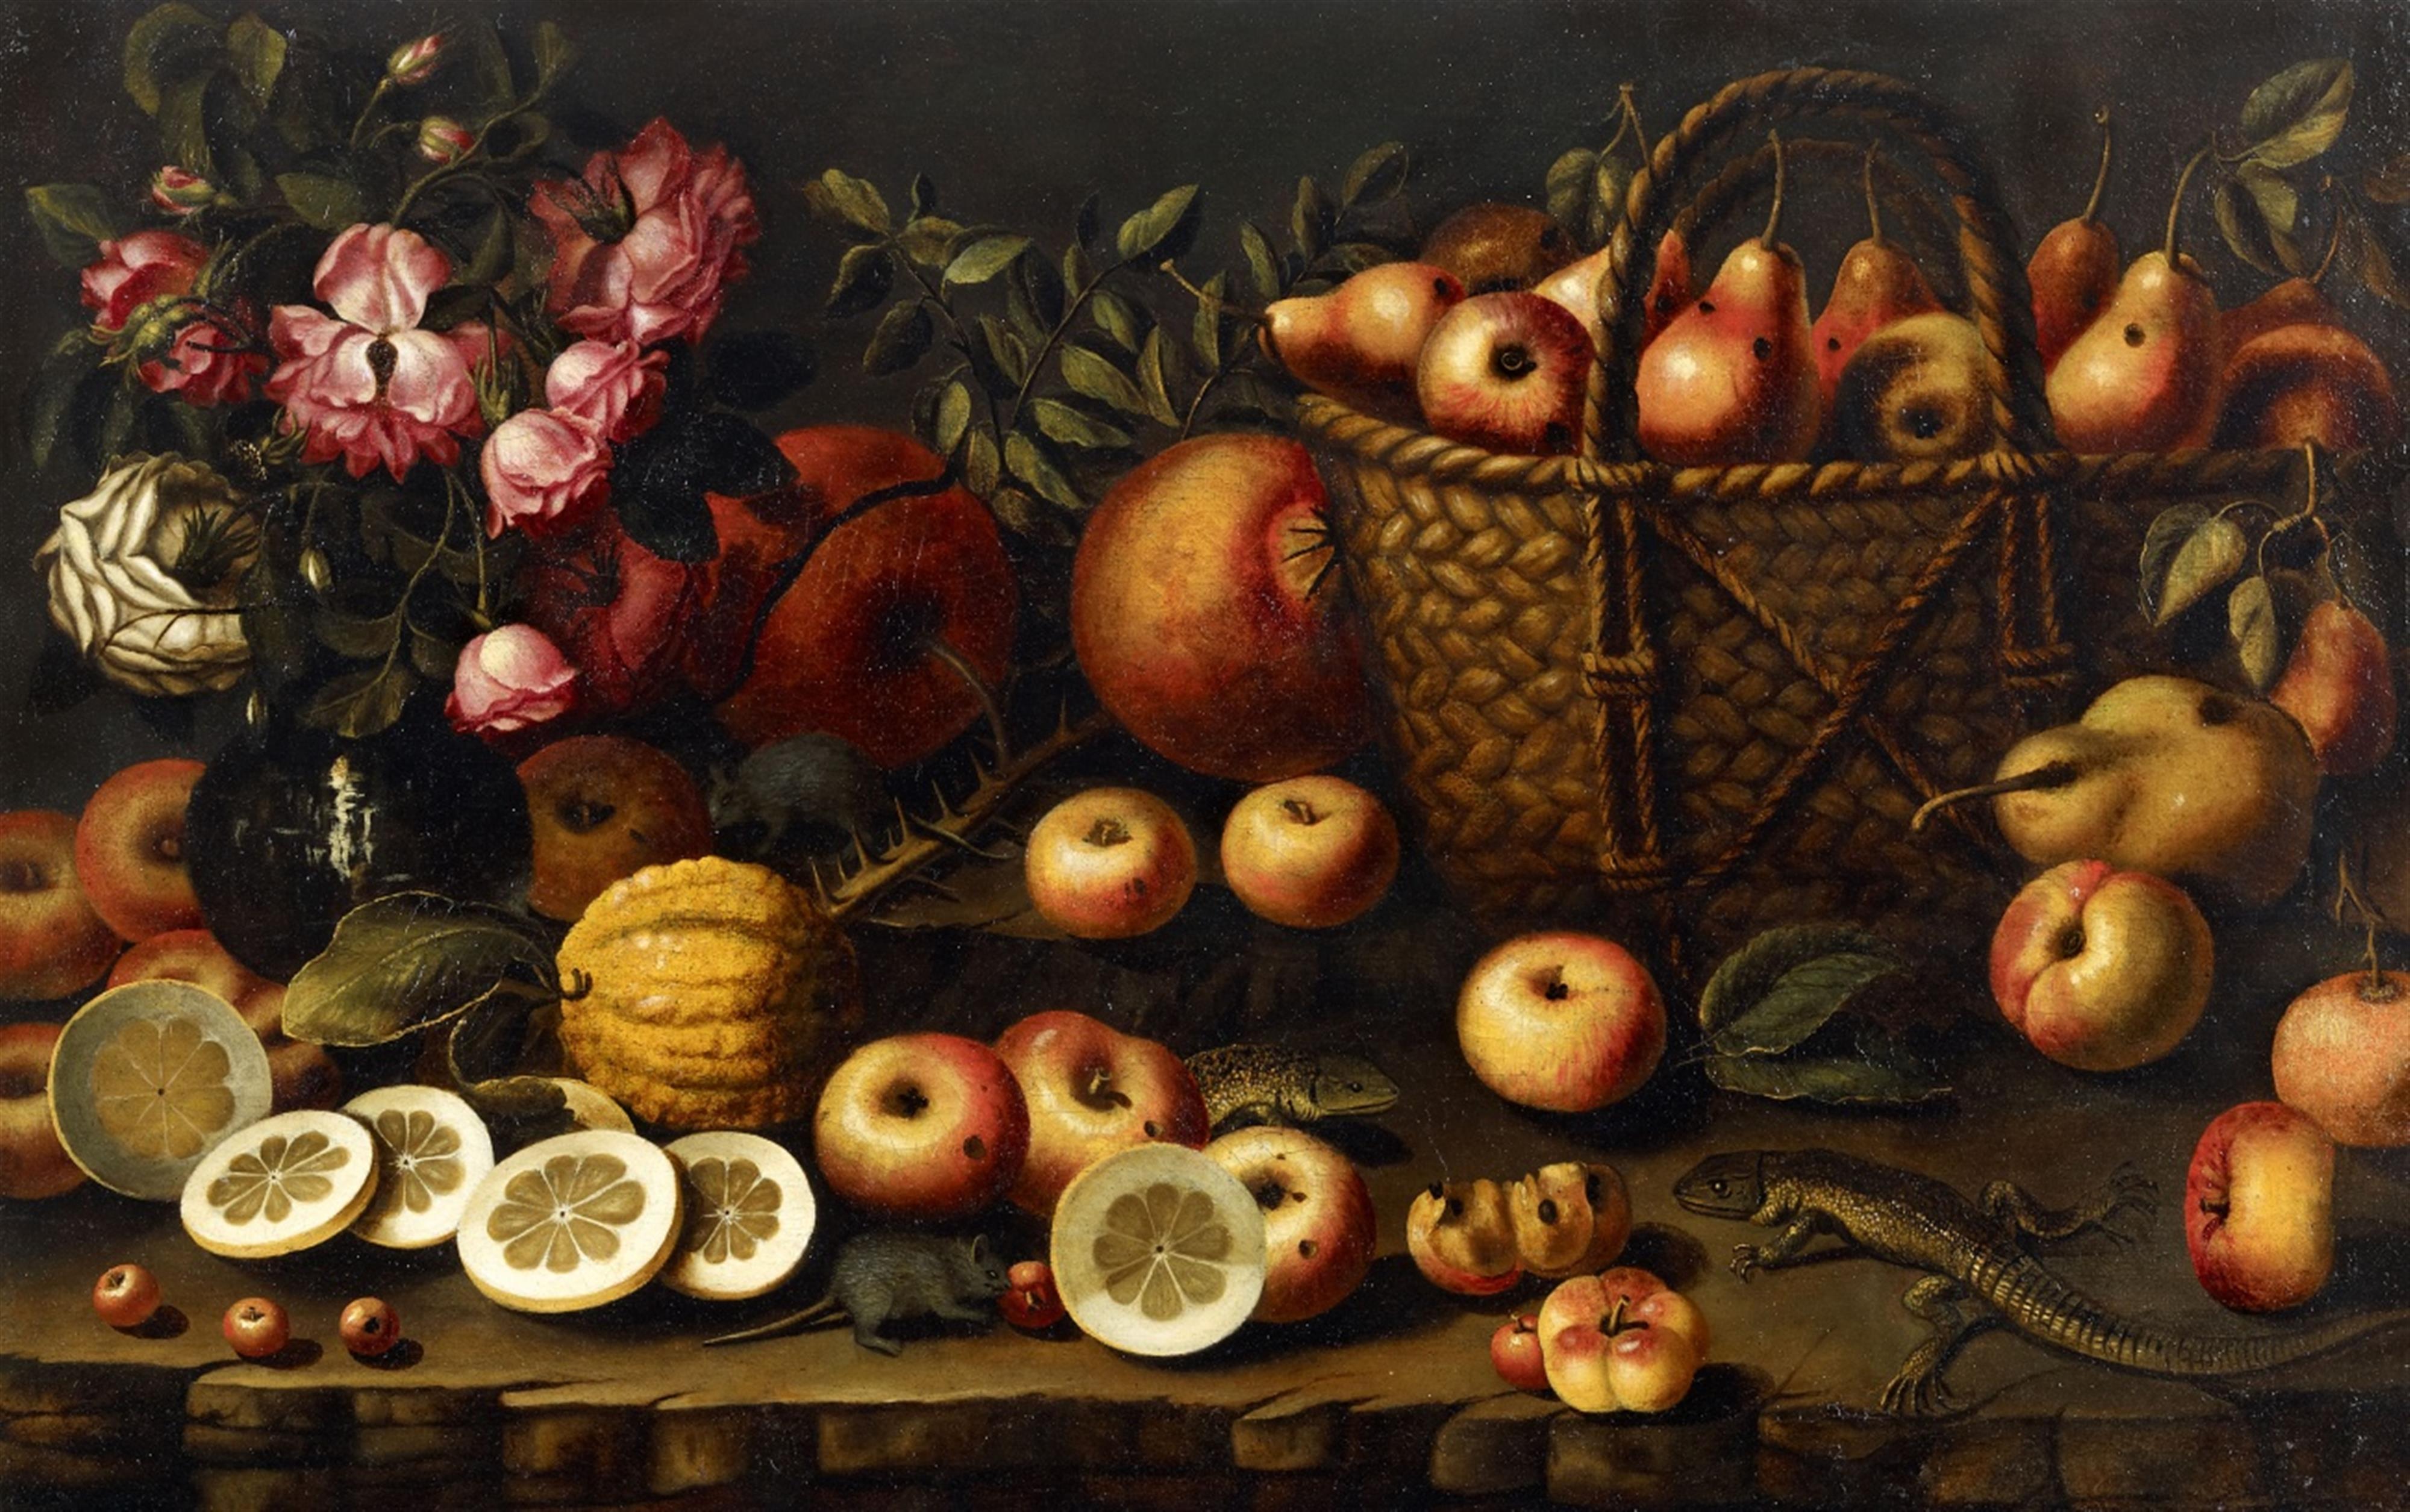 Spanish School of the early 17th century - Still Life with Roses, Fruit and a Lizard - image-1